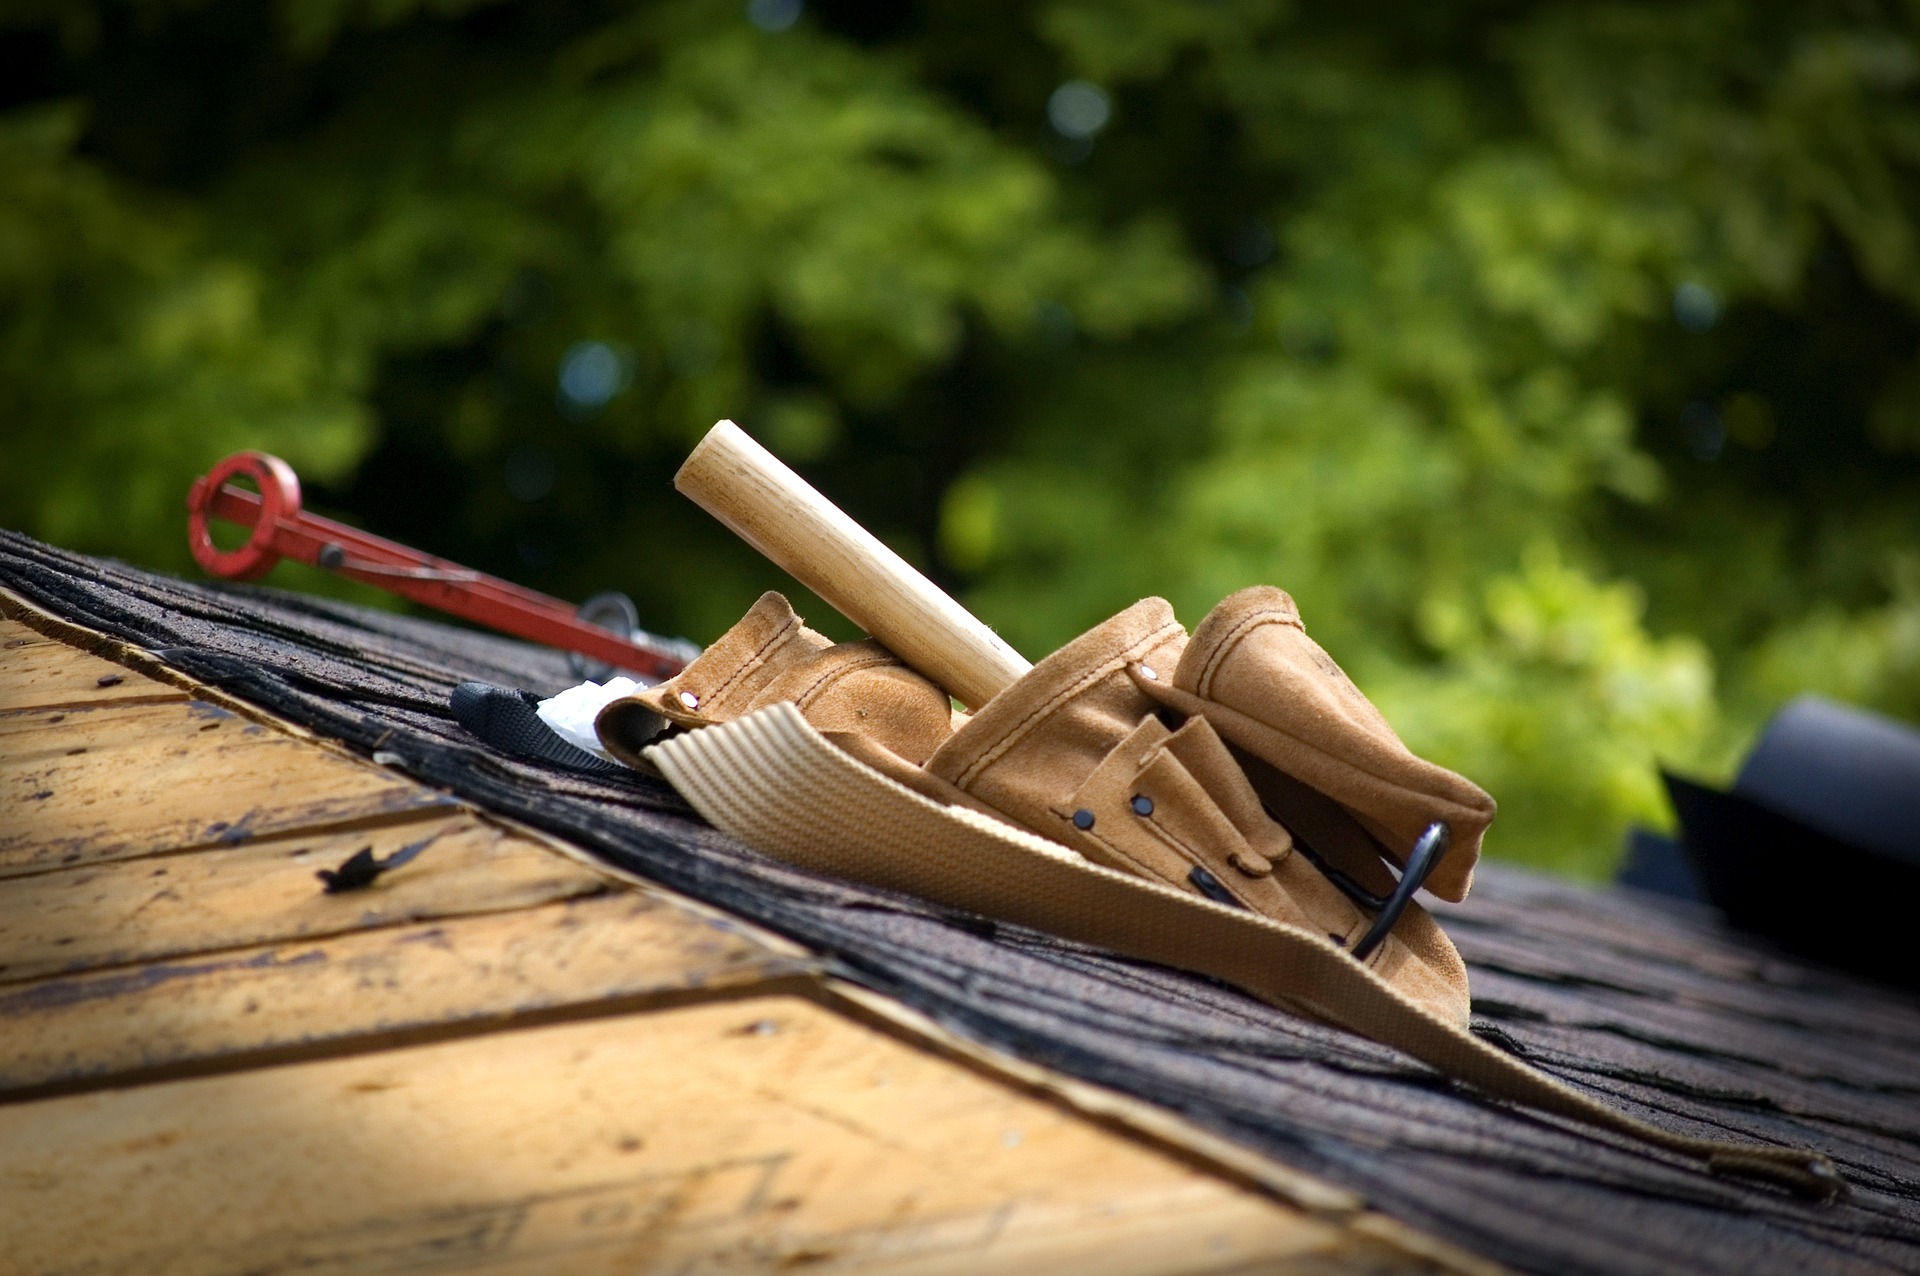 A roof repair tool is sitting on top of a roof.